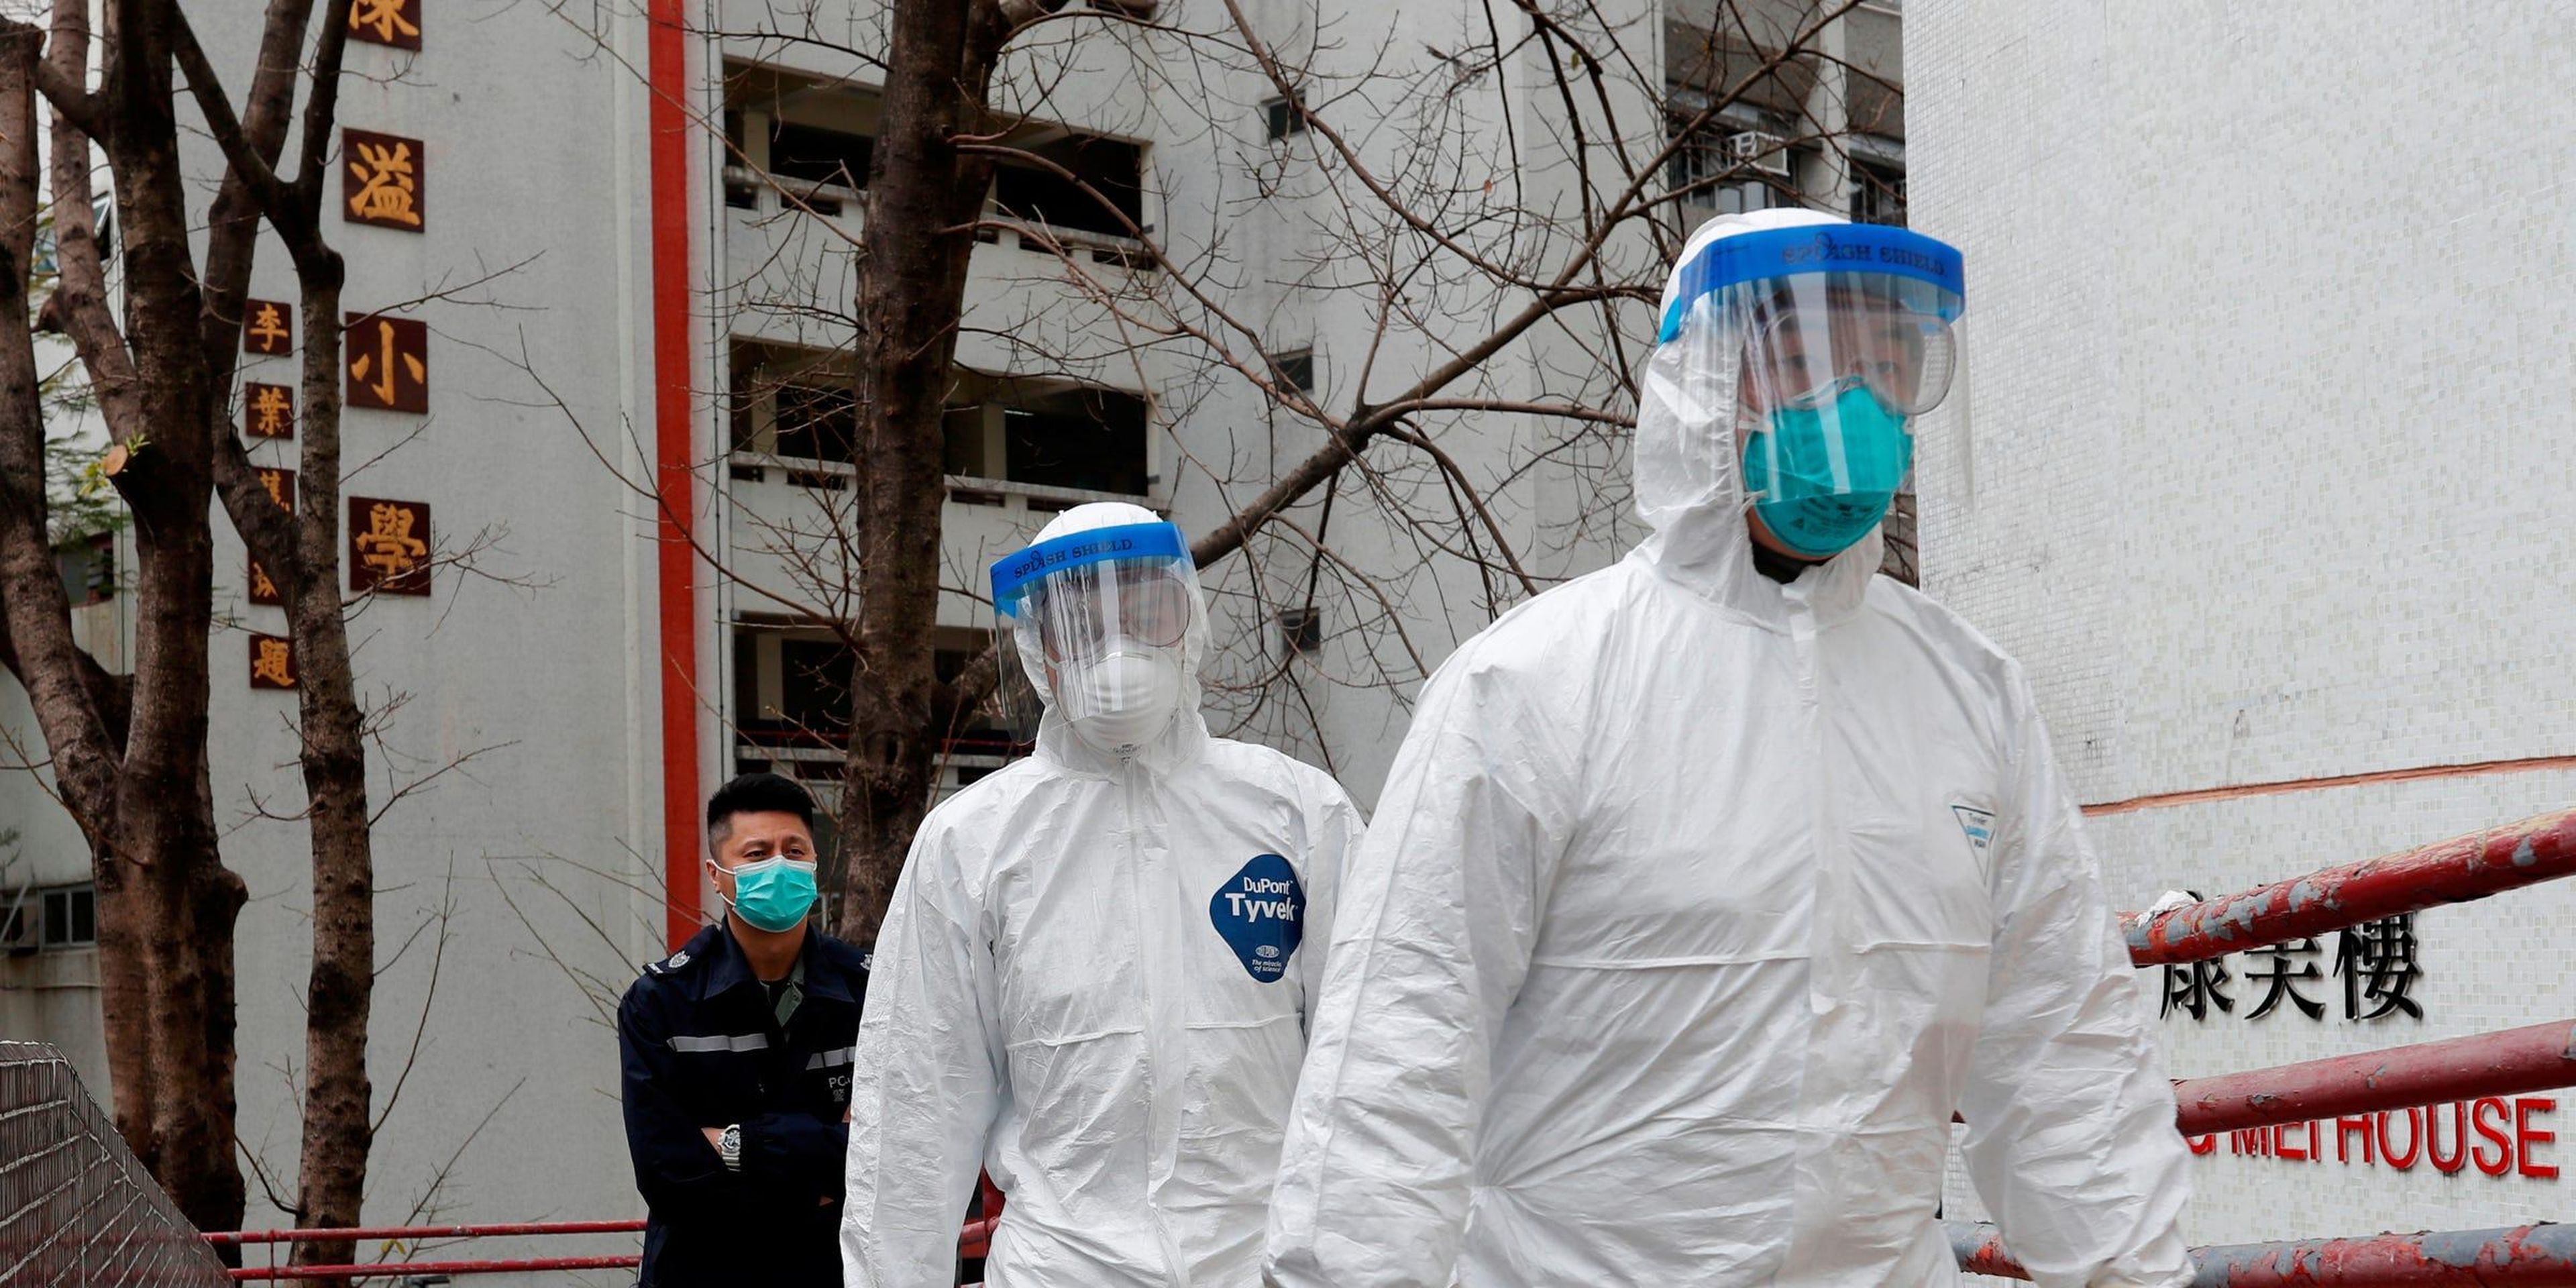 Health workers in protective gear at Cheung Hong Estate in Hong Kong in February.